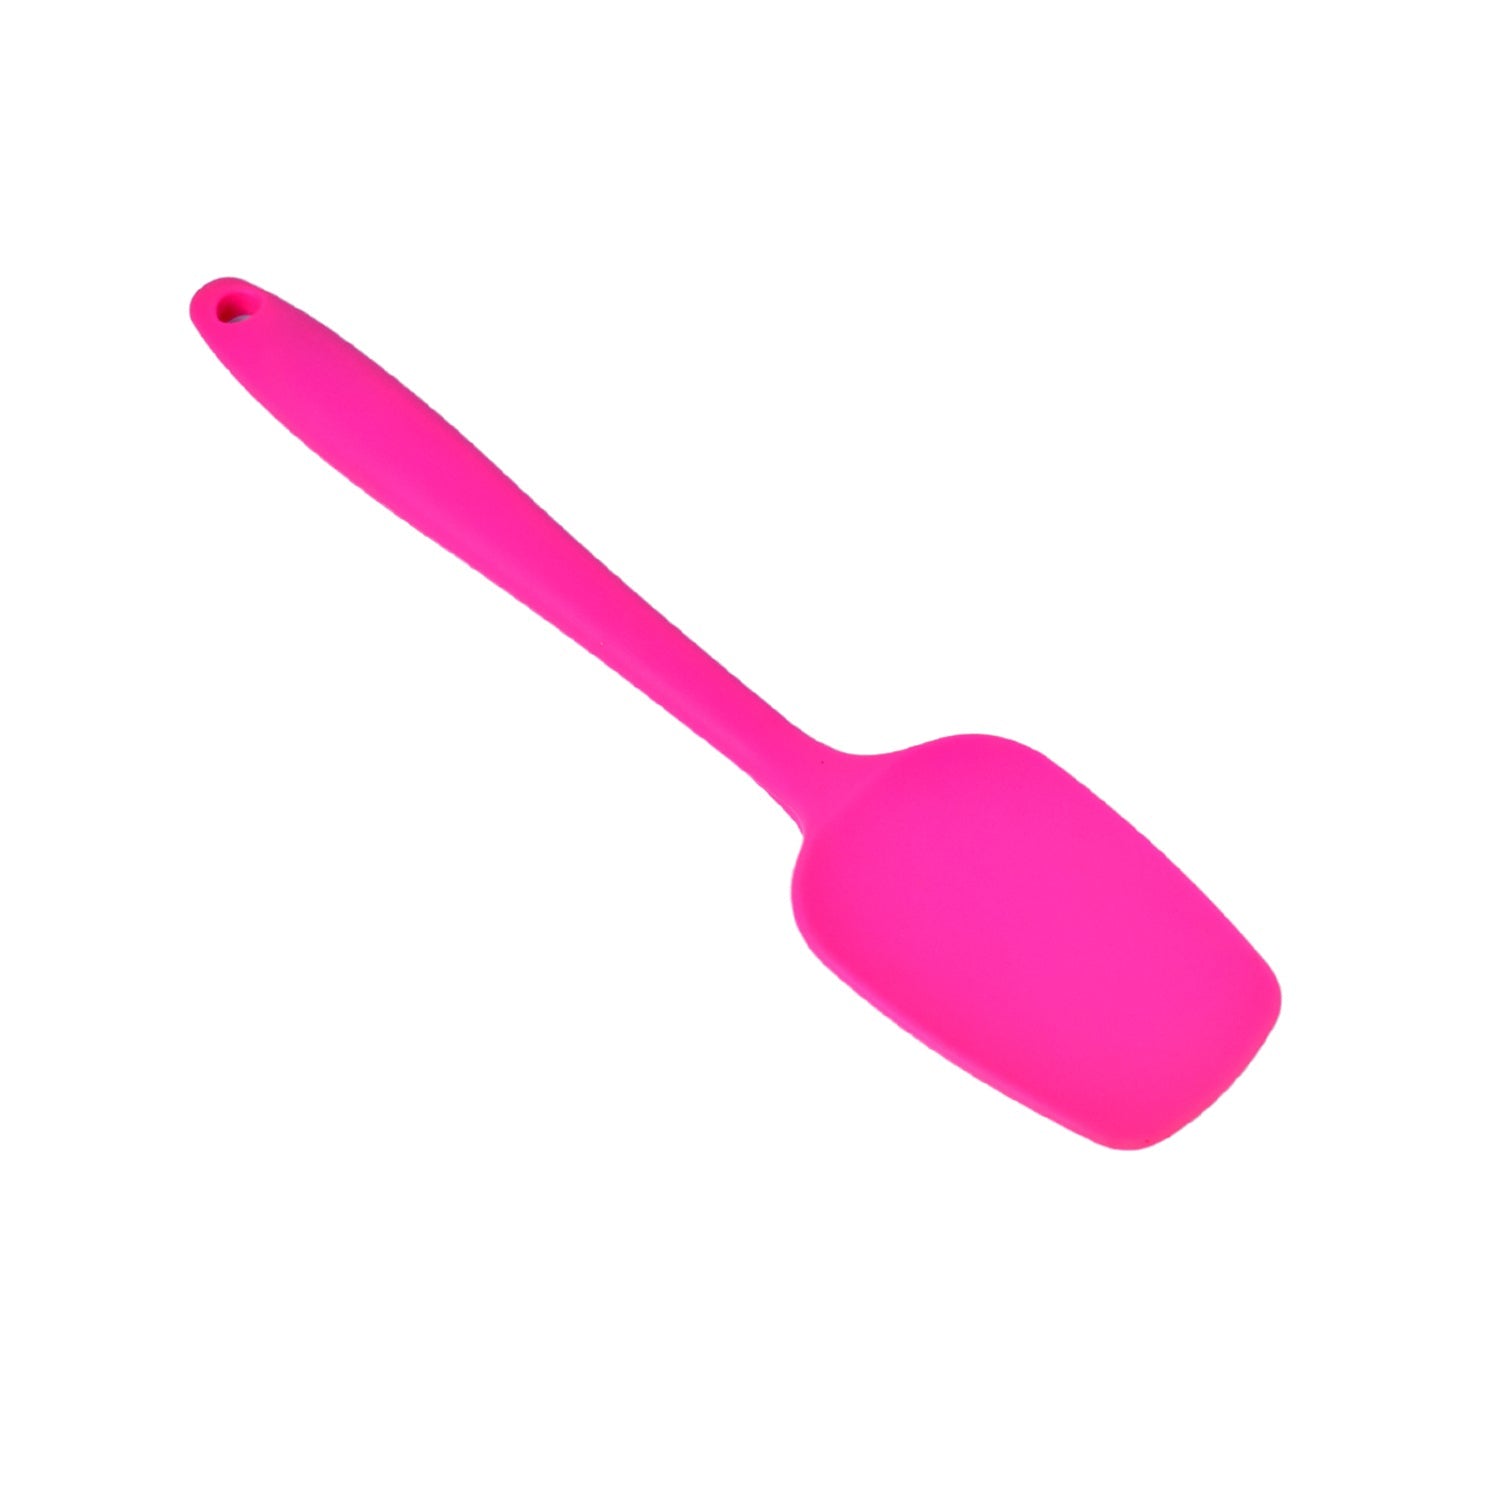 5437 Silicone Spatula Set - Rubber Kitchen Spatulas for Baking, Cooking, & Mixing - 600°F Heat-Resistant & BPA Free Silicone Scraper Spatulas for Nonstick Cookware - Dishwasher Safe (27cm)